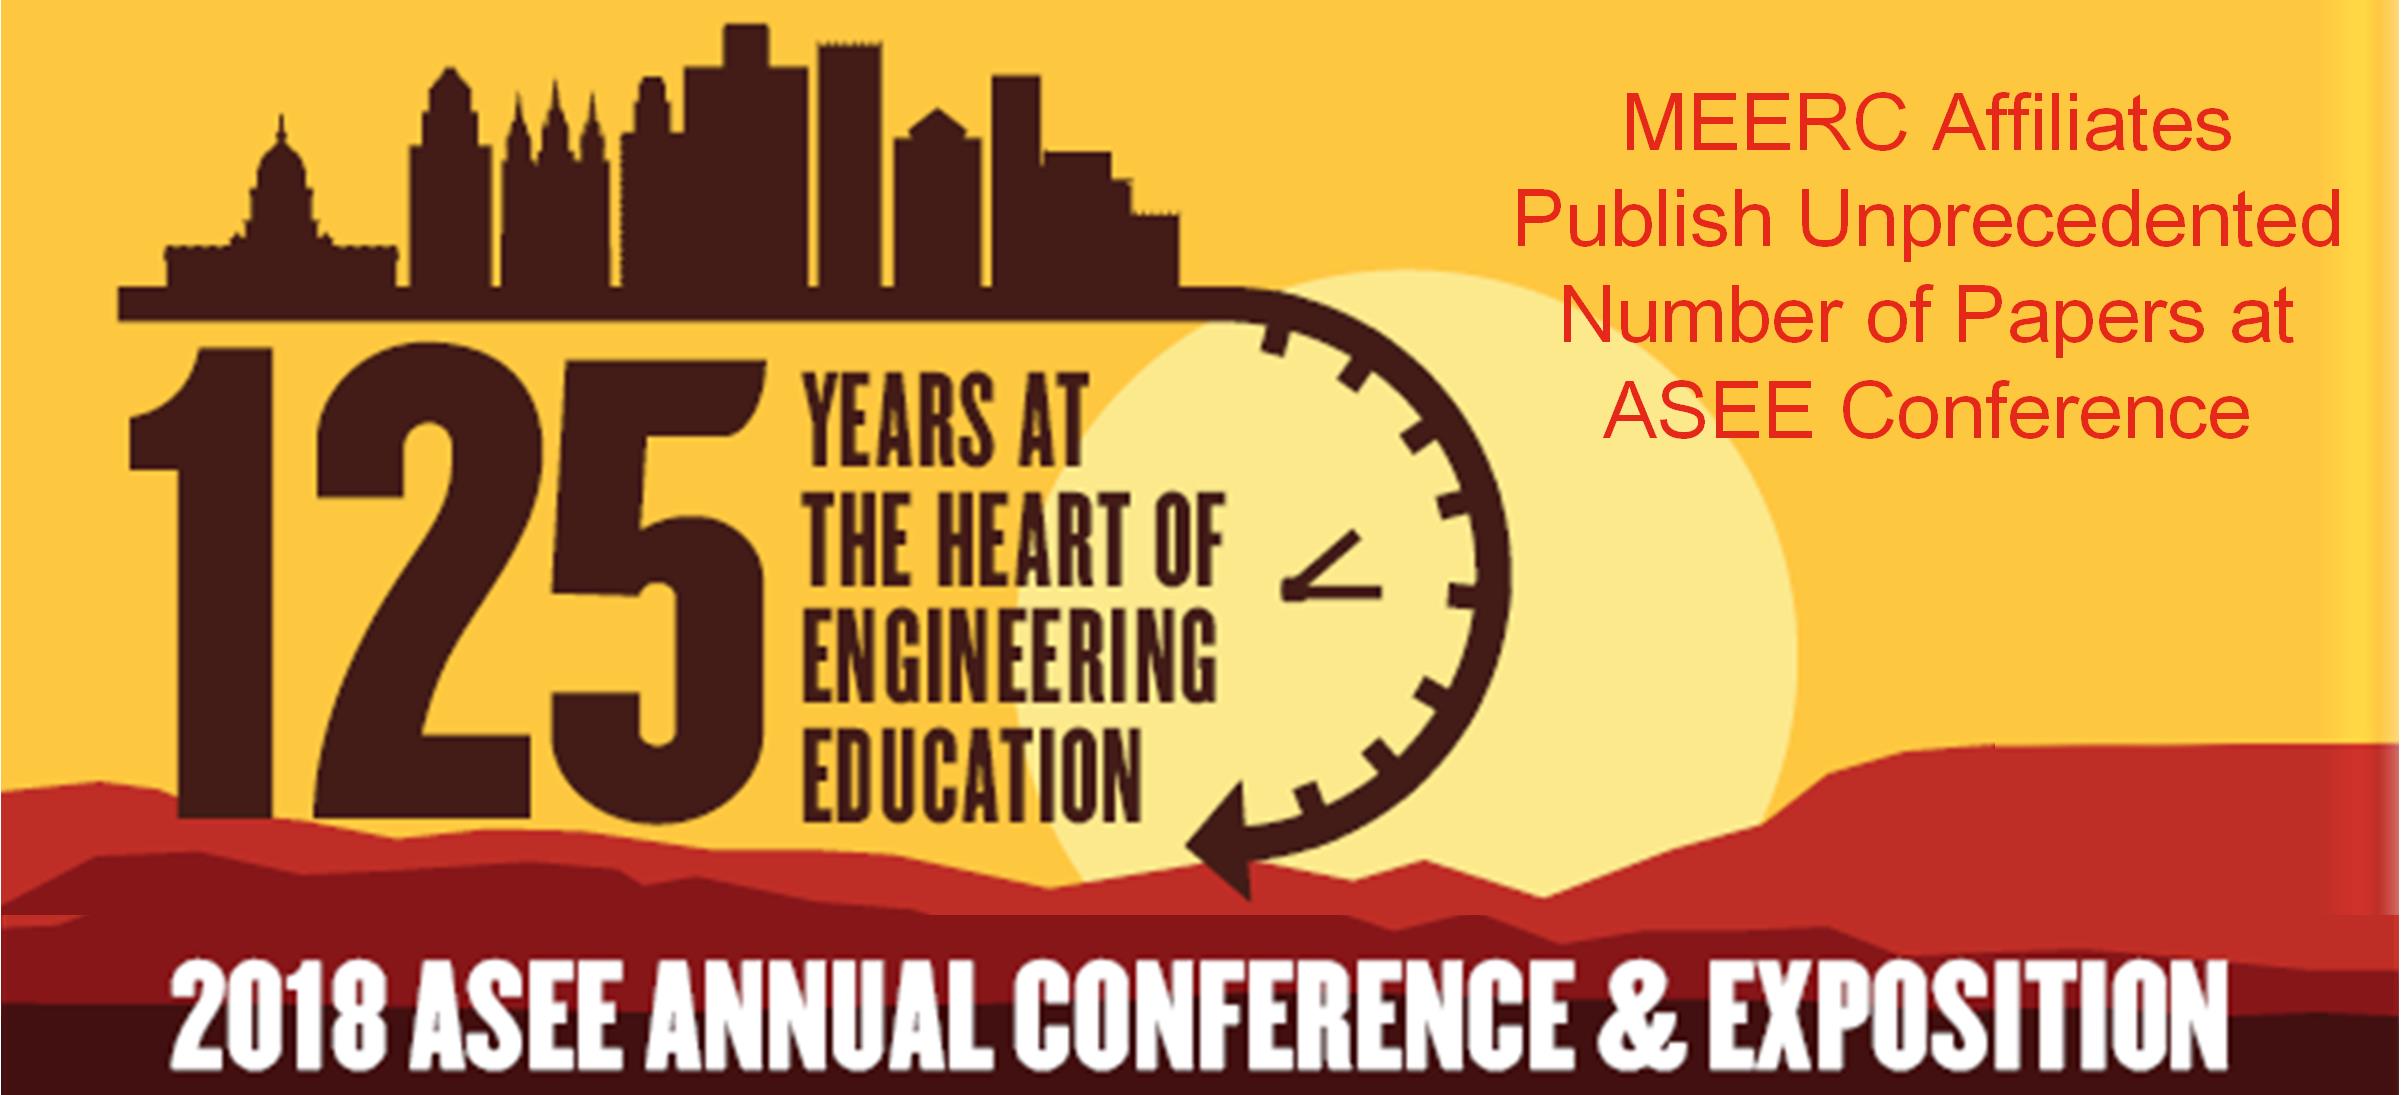 MEERC at ASEE 2018